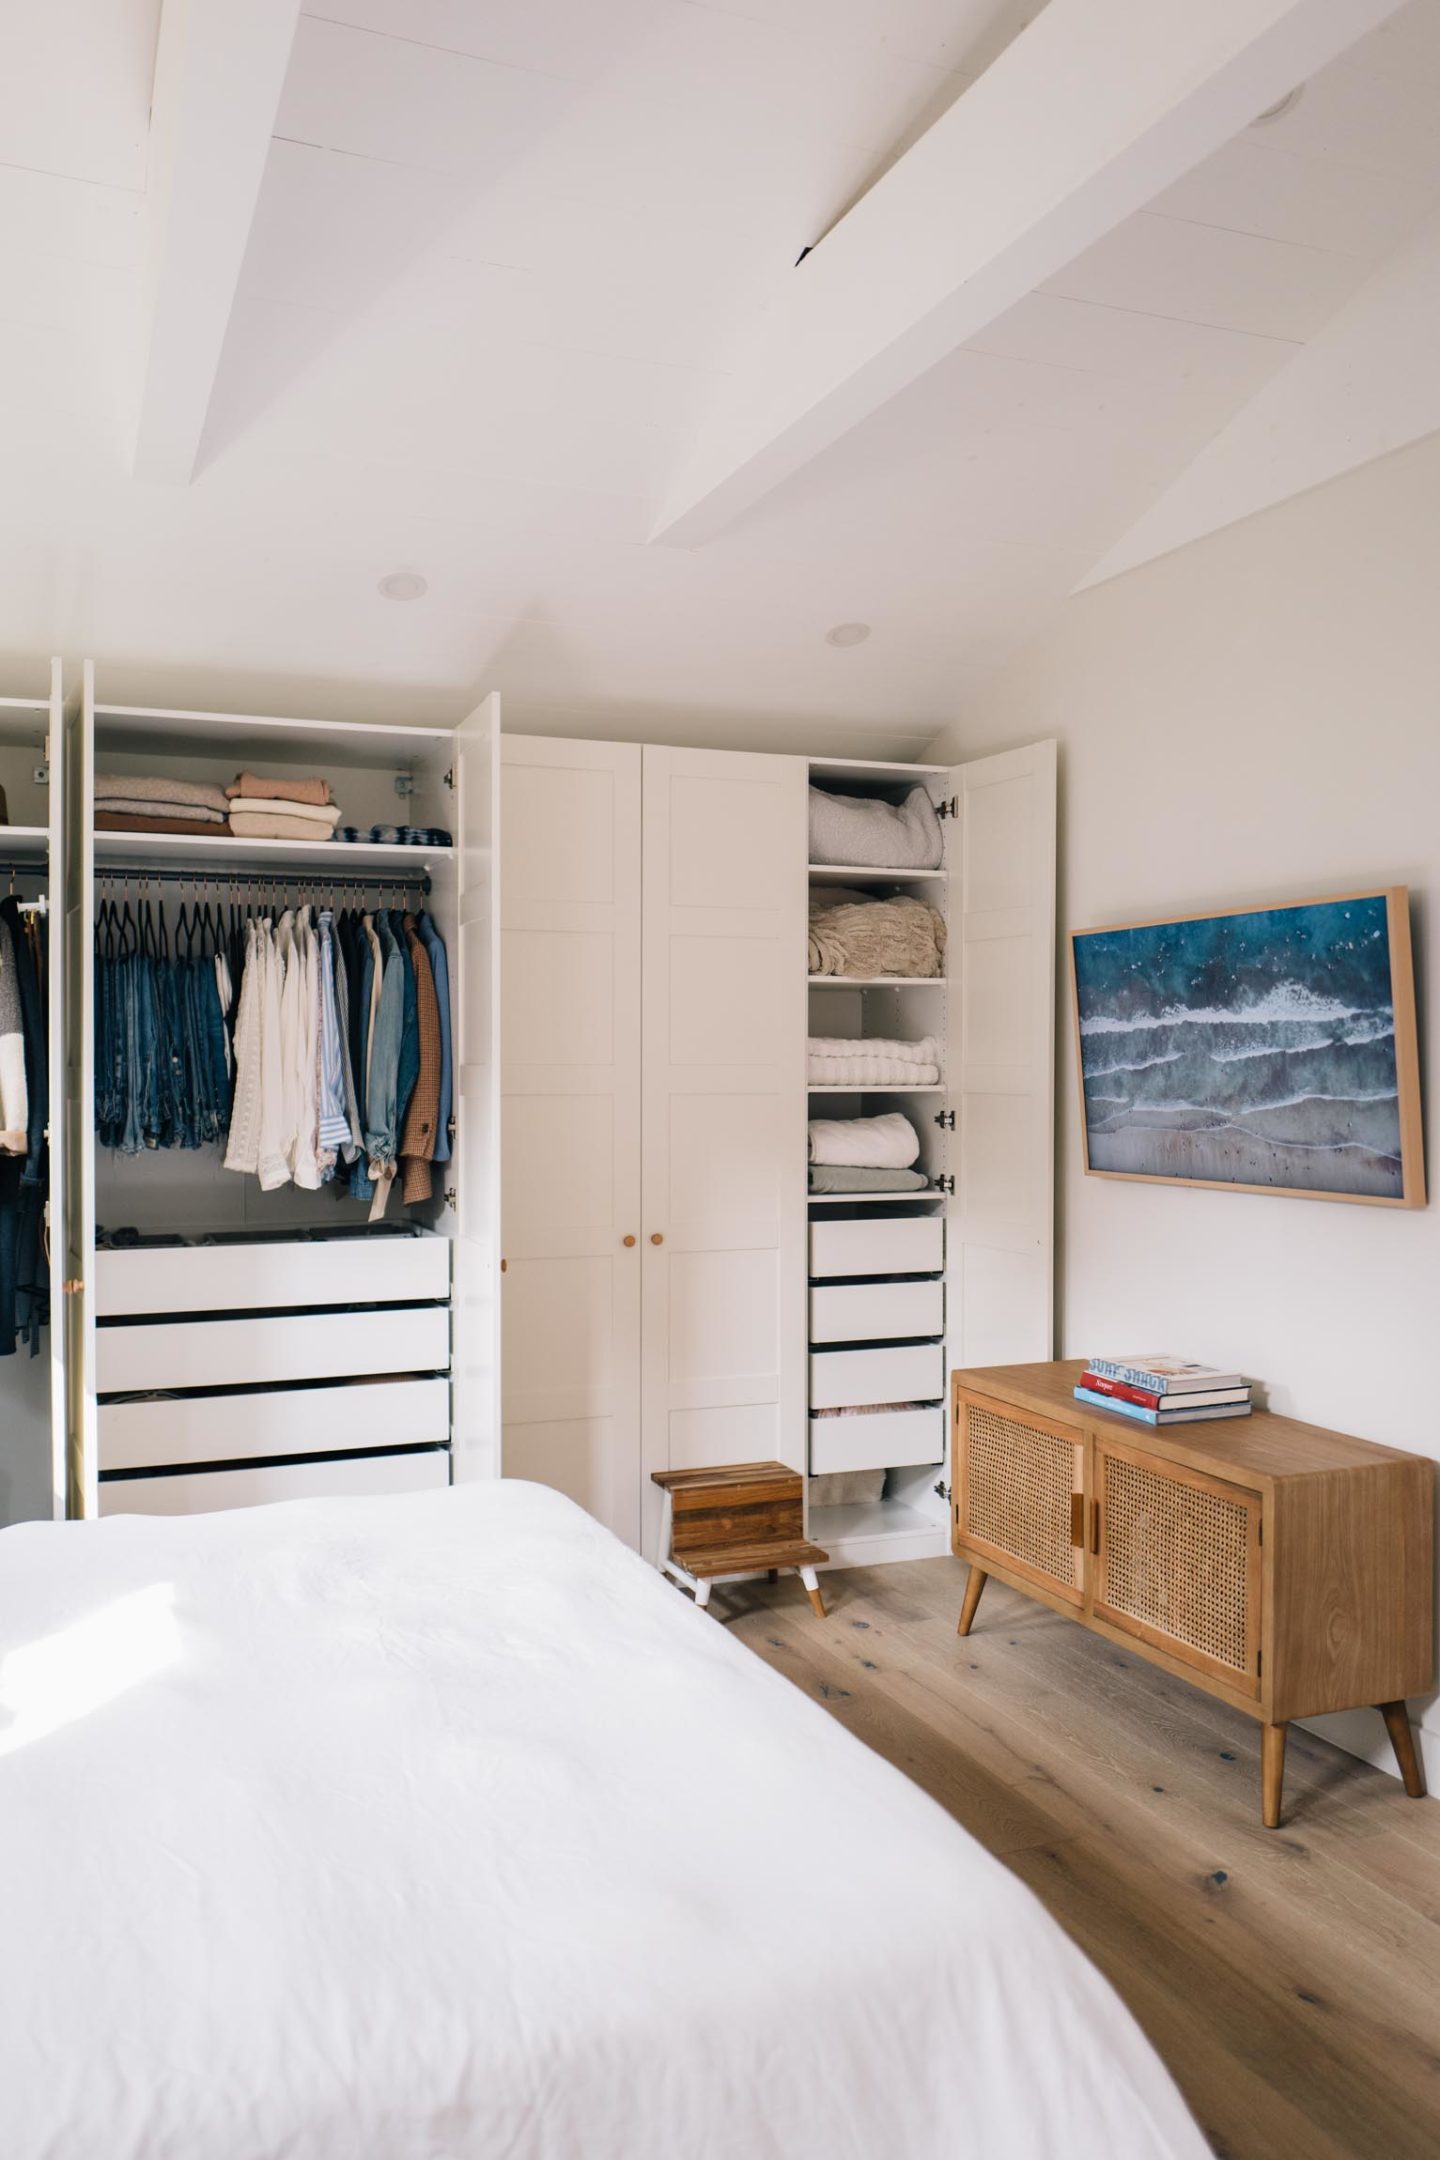 How We Designed Our IKEA PAX Wardrobe